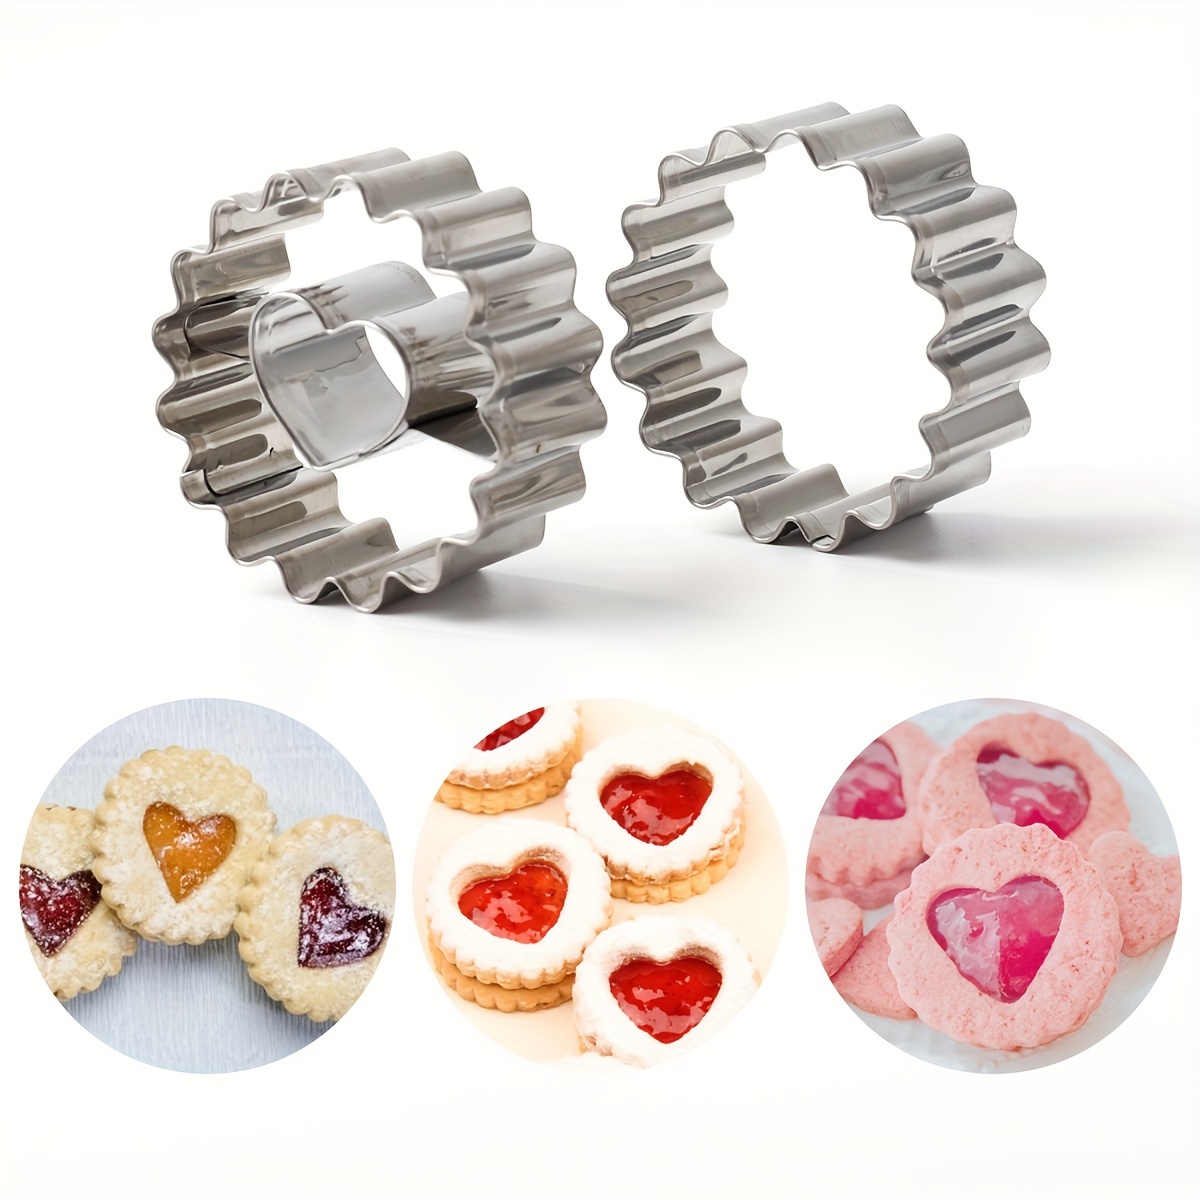 

2pcs, Stainless Steel Cookie Cutters, Flower Heart Shape Candy Mold, Biscuit Molds, Chocolate Cutters, Cake Decorating Molds, Baking Tools, Kitchen Gadgets, Kitchen Accessories, Home Kitchen Items